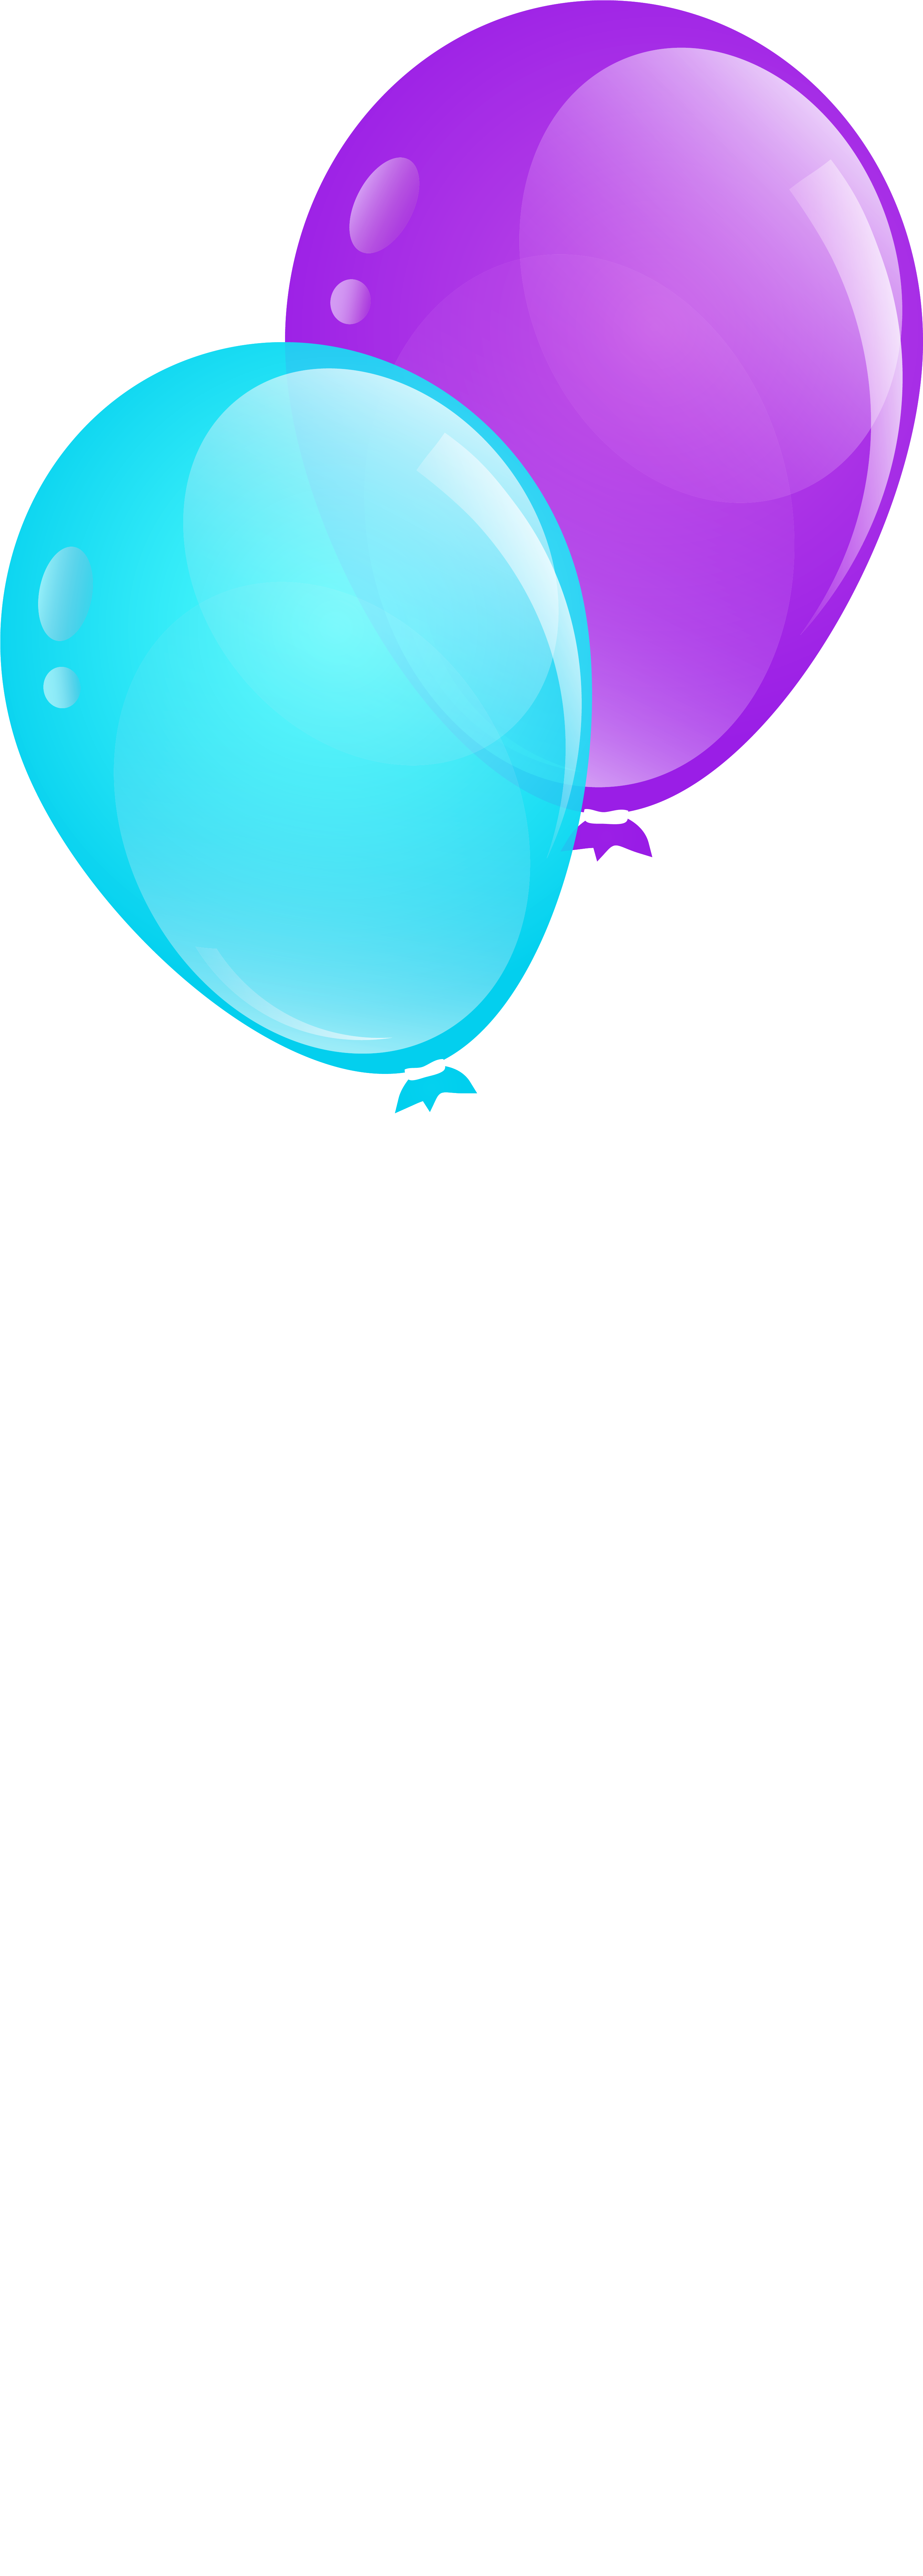 Blue And Purple Balloons Clip Art Image - Purple And Teal Balloons, Hd Png Download